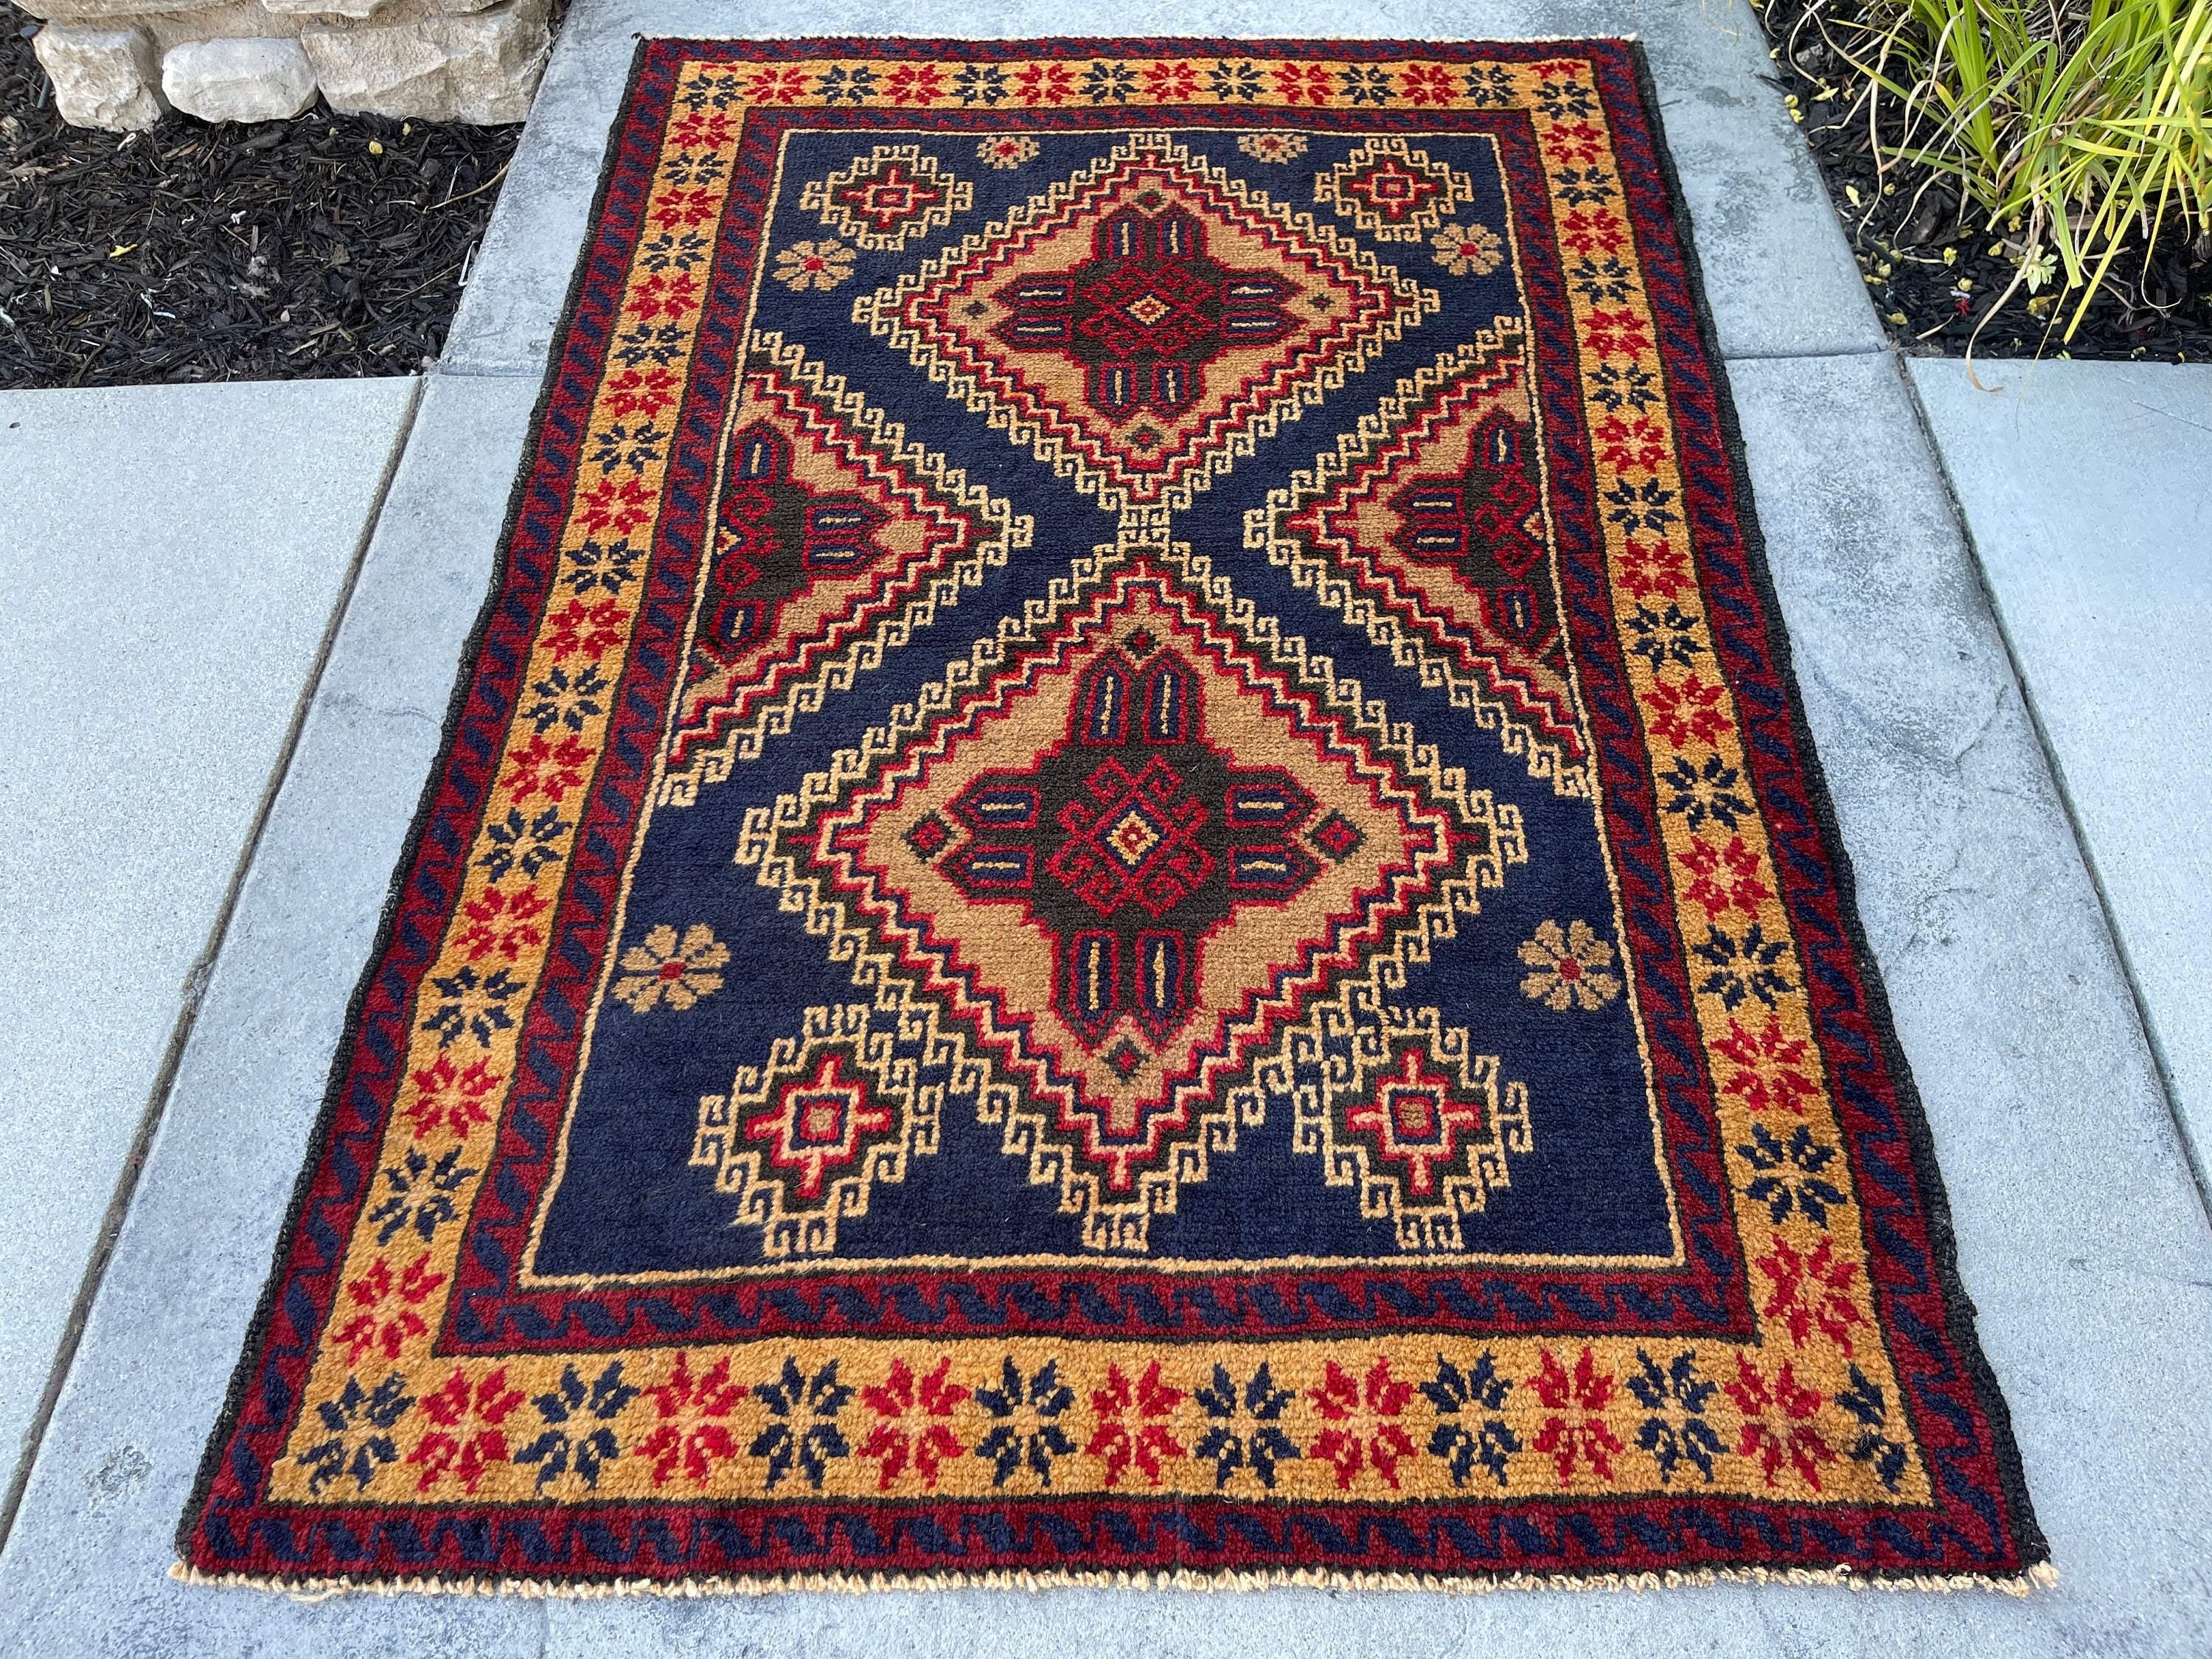 This rug was made with 100% premium, Afghan-sourced Ghazni wool with a cotton foundation. The rich colors are dipped in natural dyes to create an heirloom finish that does not bleed and is meant to last for generations. Sourced through fair trade